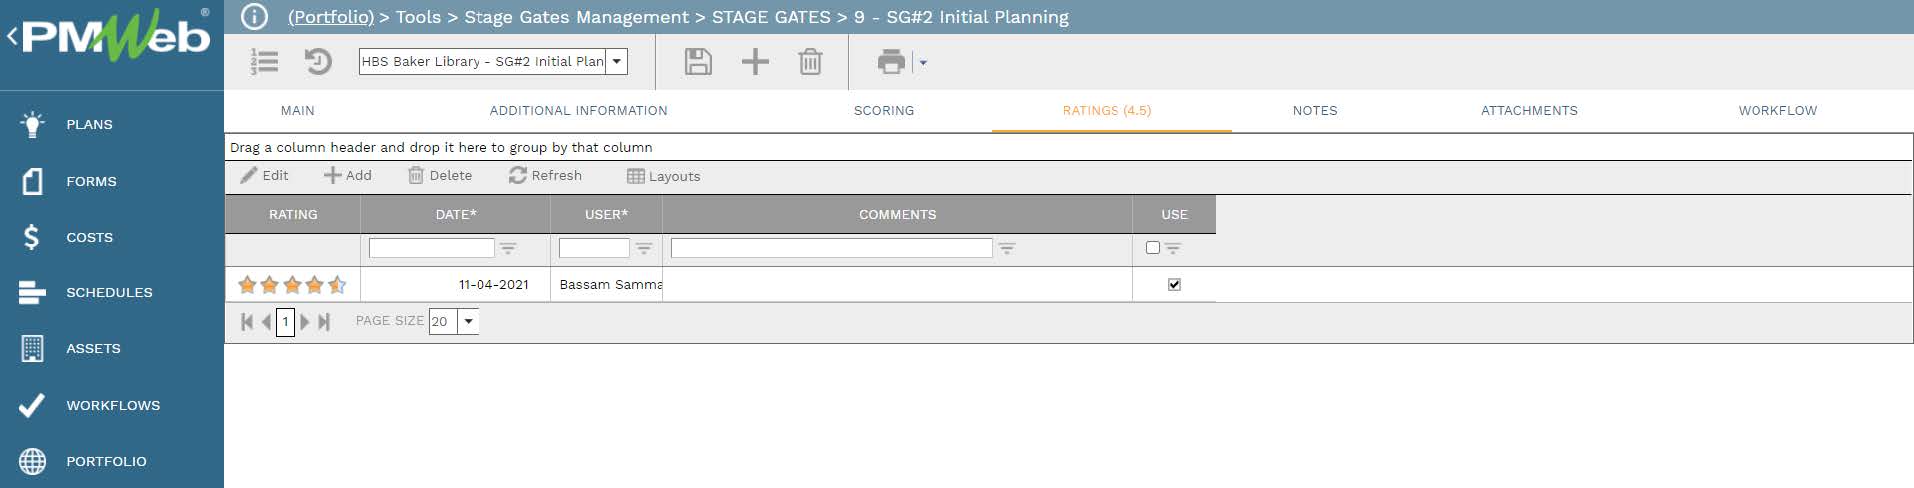 PMWeb 7 Tools Stage Gates Managment Stage Gates Initial Planning Ratings  